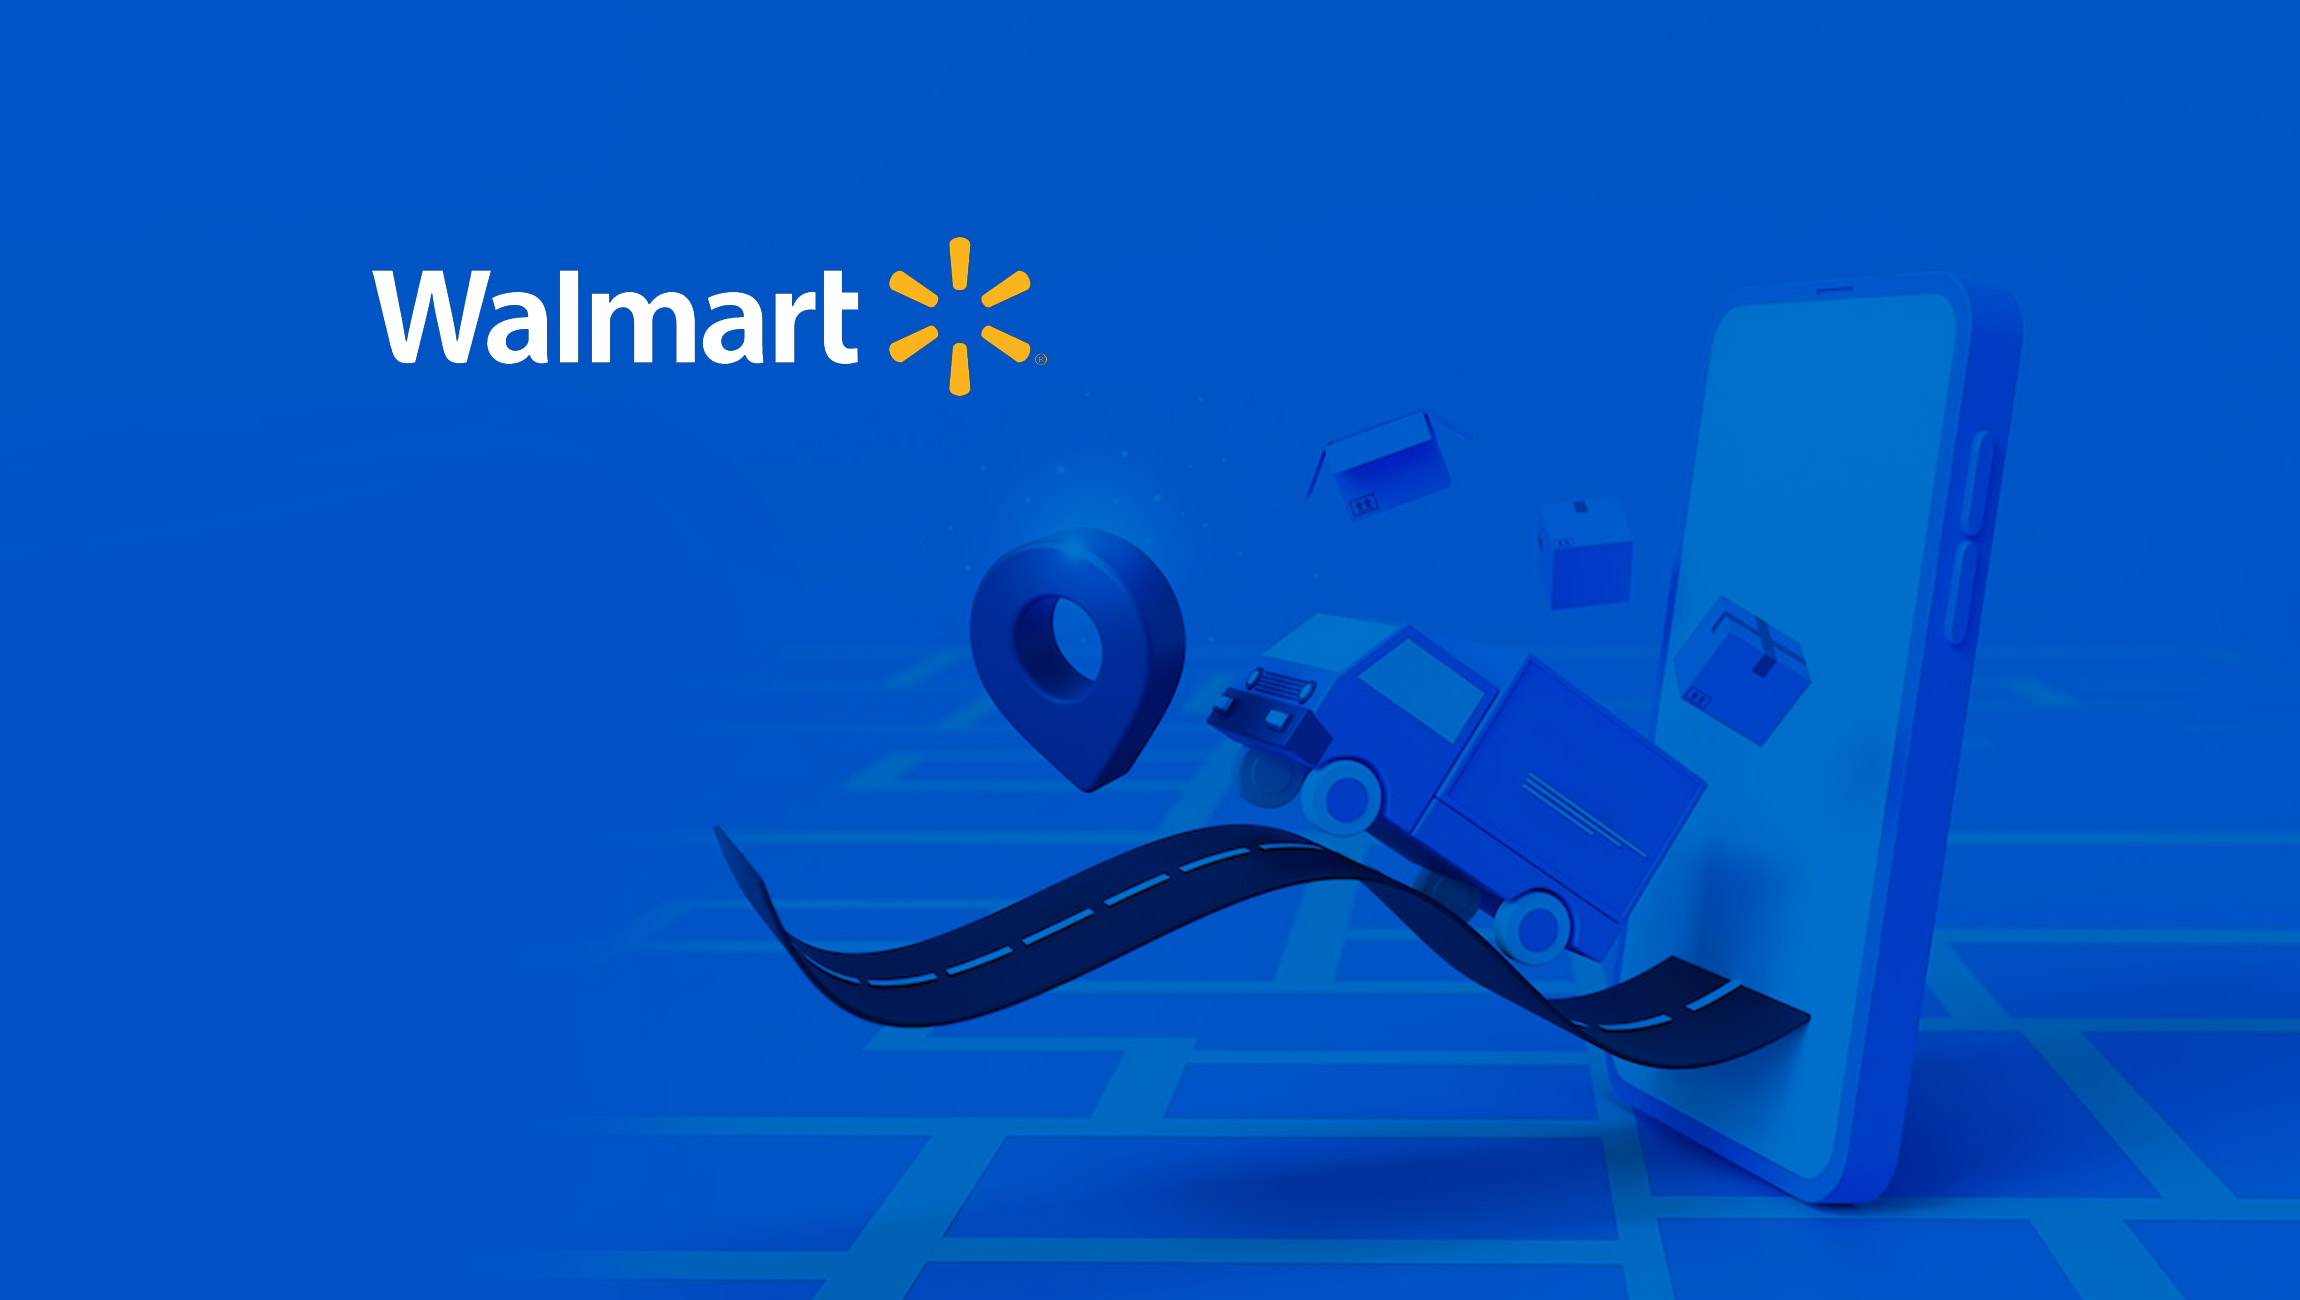 Walmart Doubles Down on Convenience, Value and Experience to Serve Customers This Holiday Season